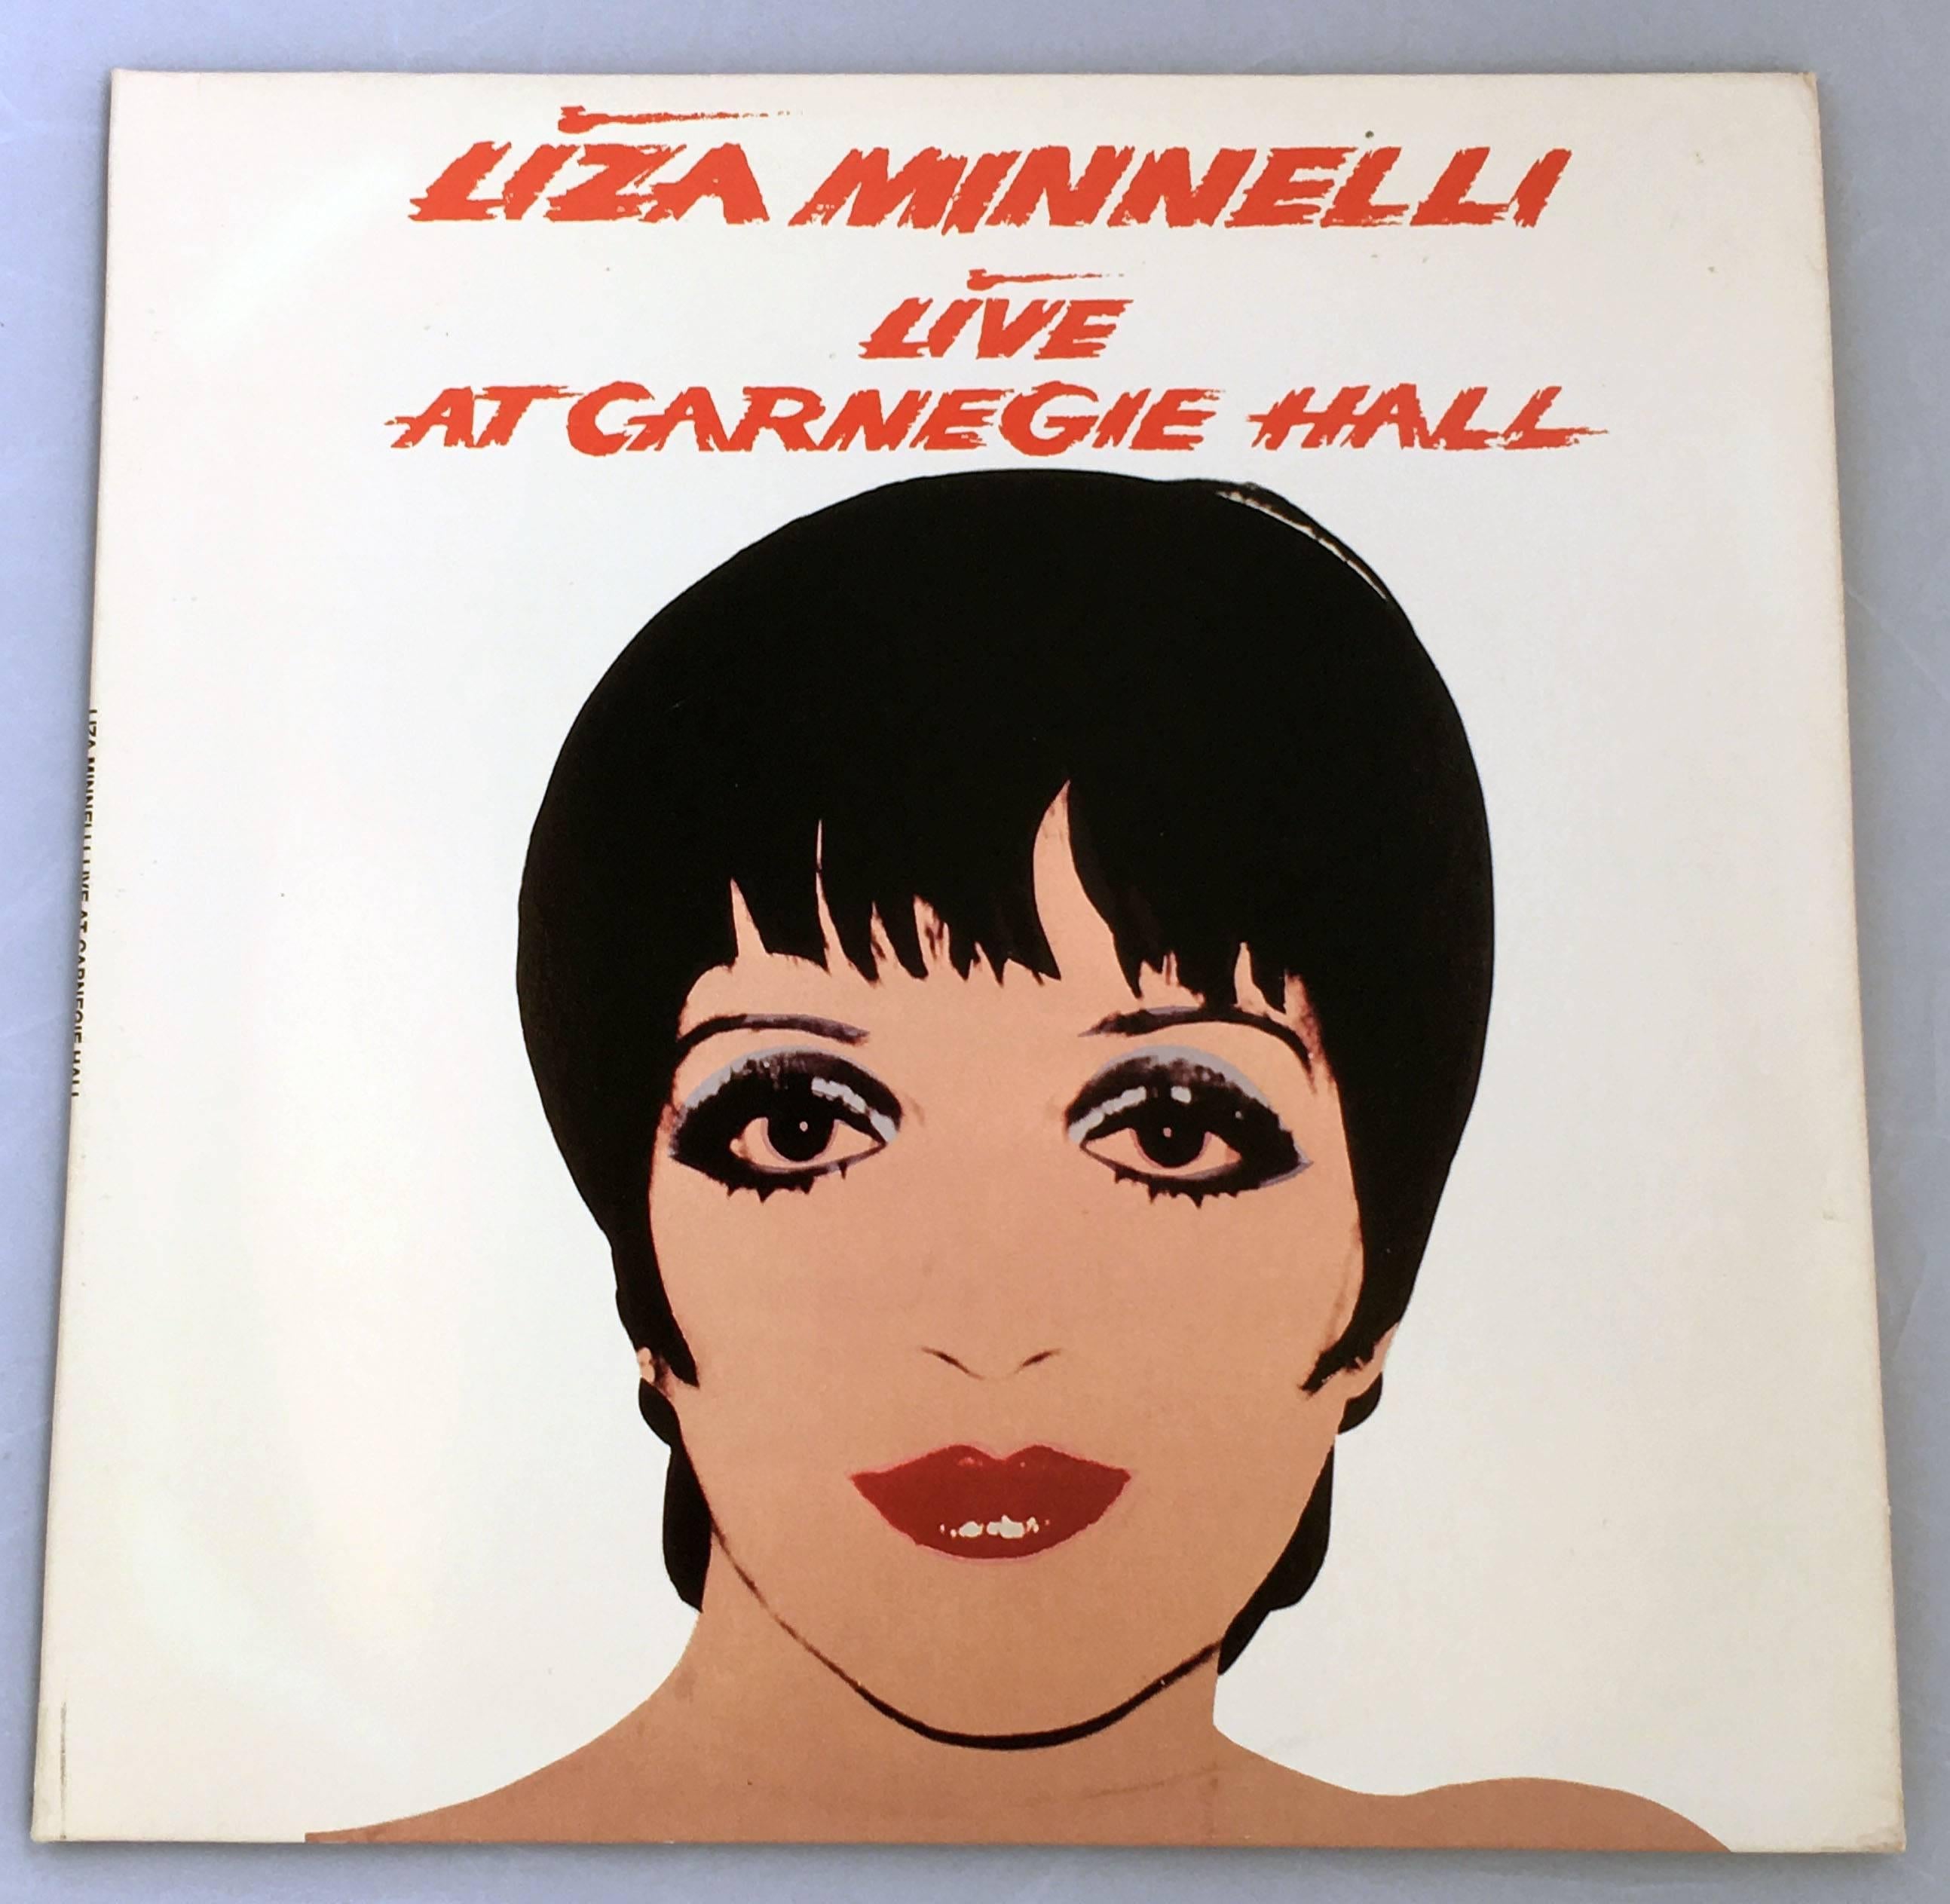 Rare Sought After Andy Warhol Liza Minnelli Vinyl Record Art:
Offset illustrated by Andy Warhol in 1981 

Off-Set Print on Vinyl Record Cover
12 x 12 inches
Minor shelf-wear; otherwise excellent condition; also includes both original vinyl record in